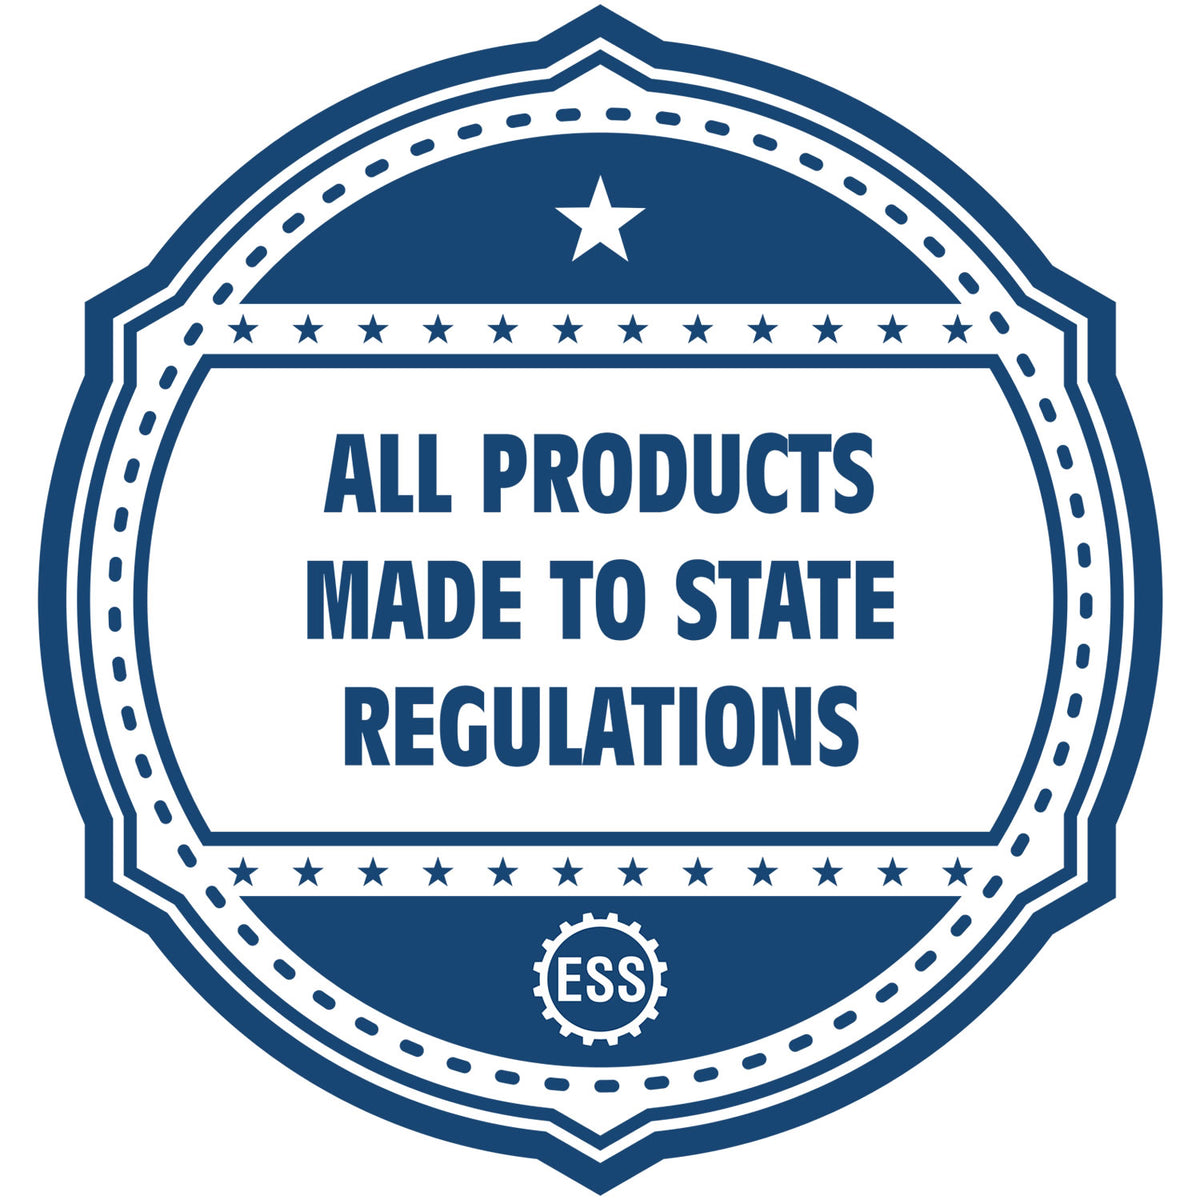 An icon or badge element for the Premium MaxLight Pre-Inked New Mexico Engineering Stamp showing that this product is made in compliance with state regulations.